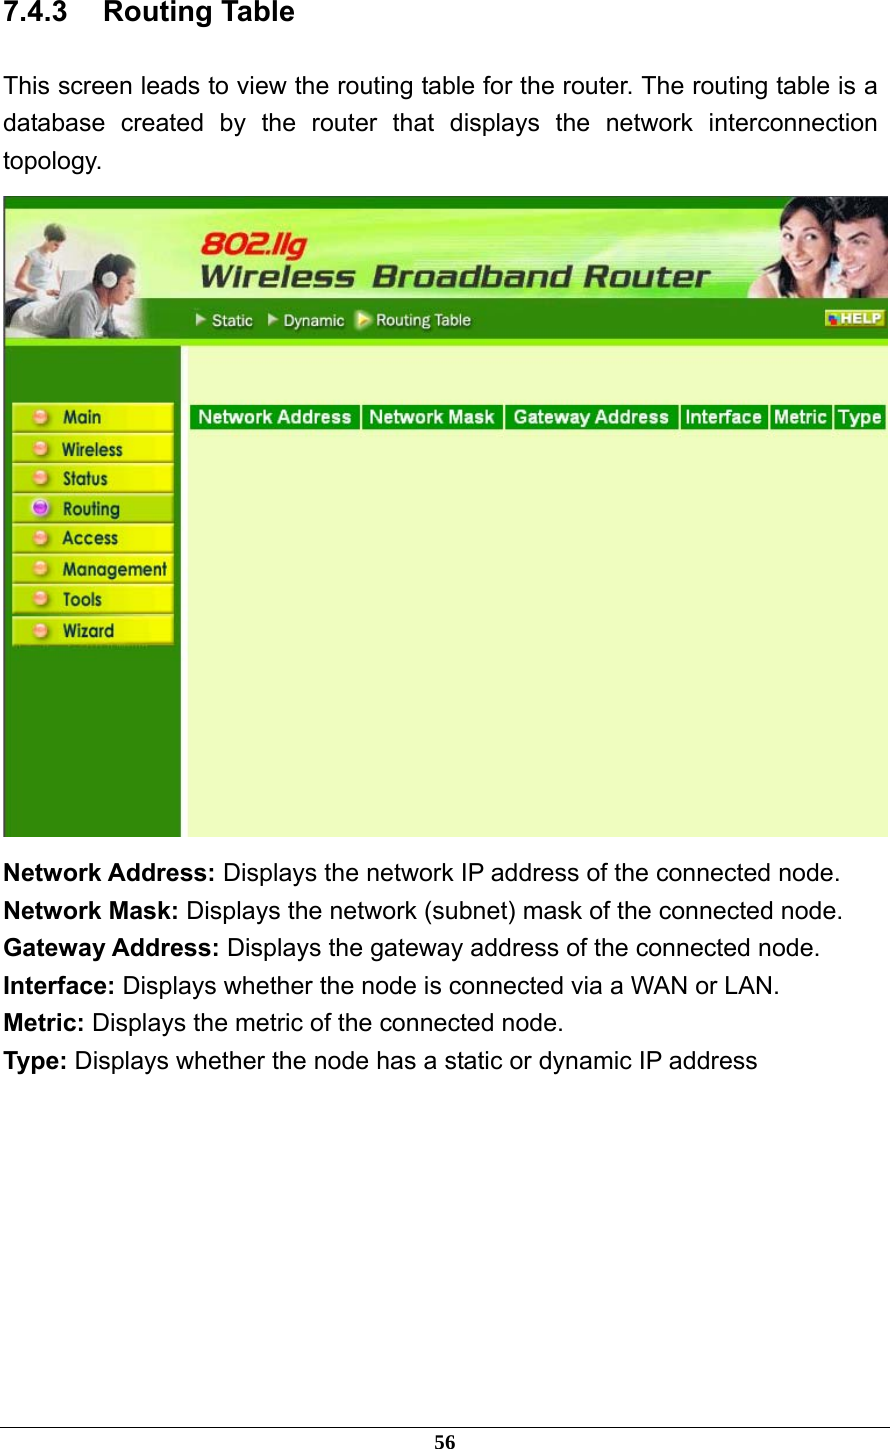 7.4.3 Routing Table This screen leads to view the routing table for the router. The routing table is a database created by the router that displays the network interconnection topology.  Network Address: Displays the network IP address of the connected node. Network Mask: Displays the network (subnet) mask of the connected node. Gateway Address: Displays the gateway address of the connected node. Interface: Displays whether the node is connected via a WAN or LAN. Metric: Displays the metric of the connected node. Type: Displays whether the node has a static or dynamic IP address        56 